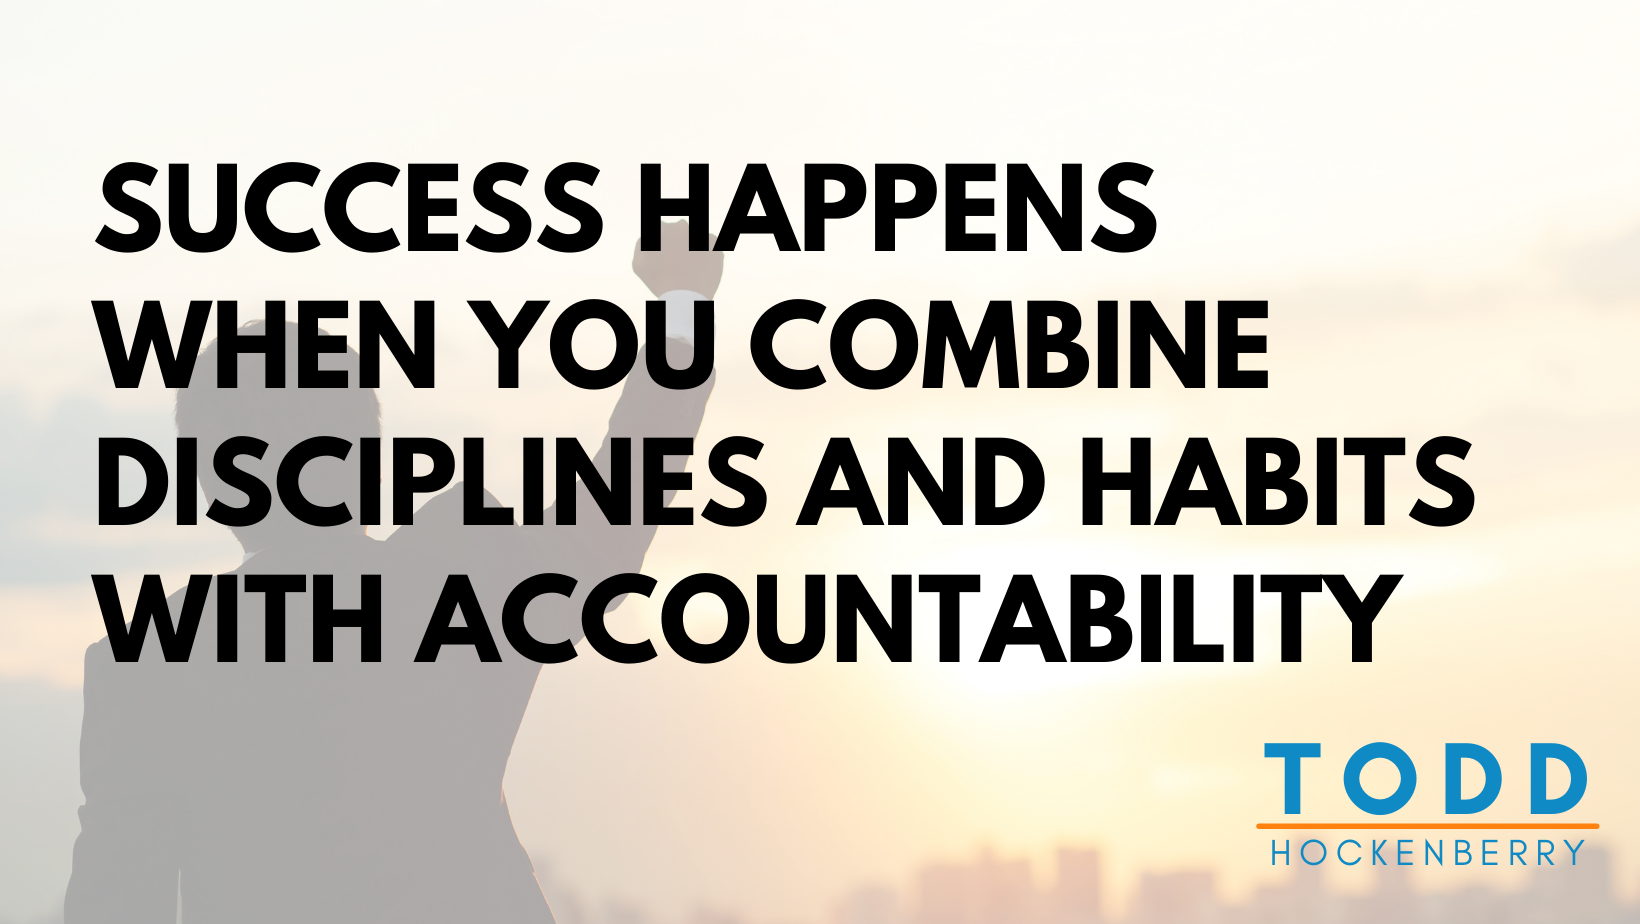 Success happens when you combine disciplines and habits with accountability